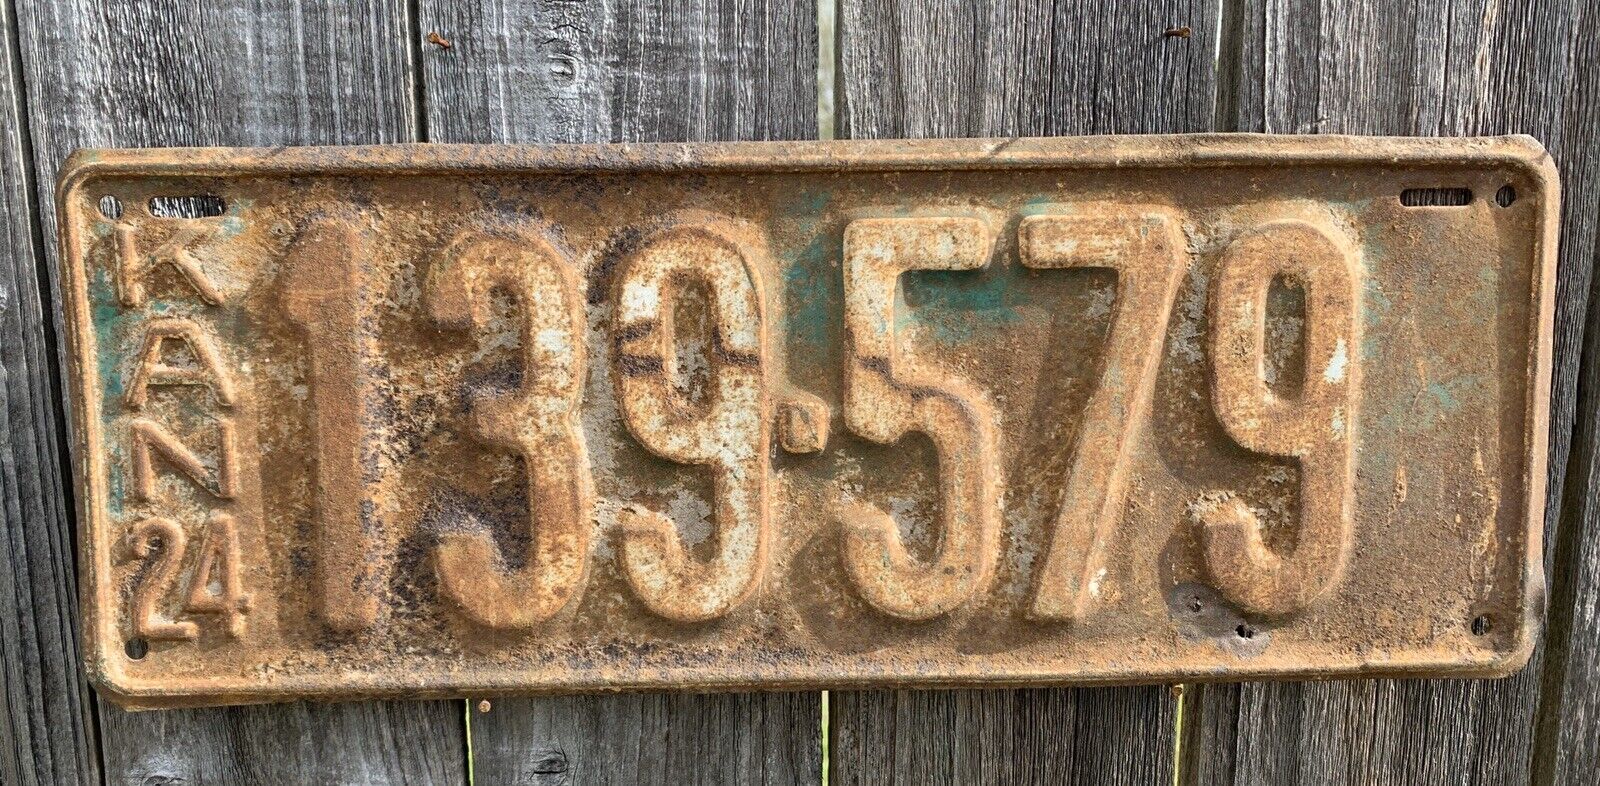 1924 KANSAS LICENSE PLATE ANTIQUE 96 YEARS OLD, #139579